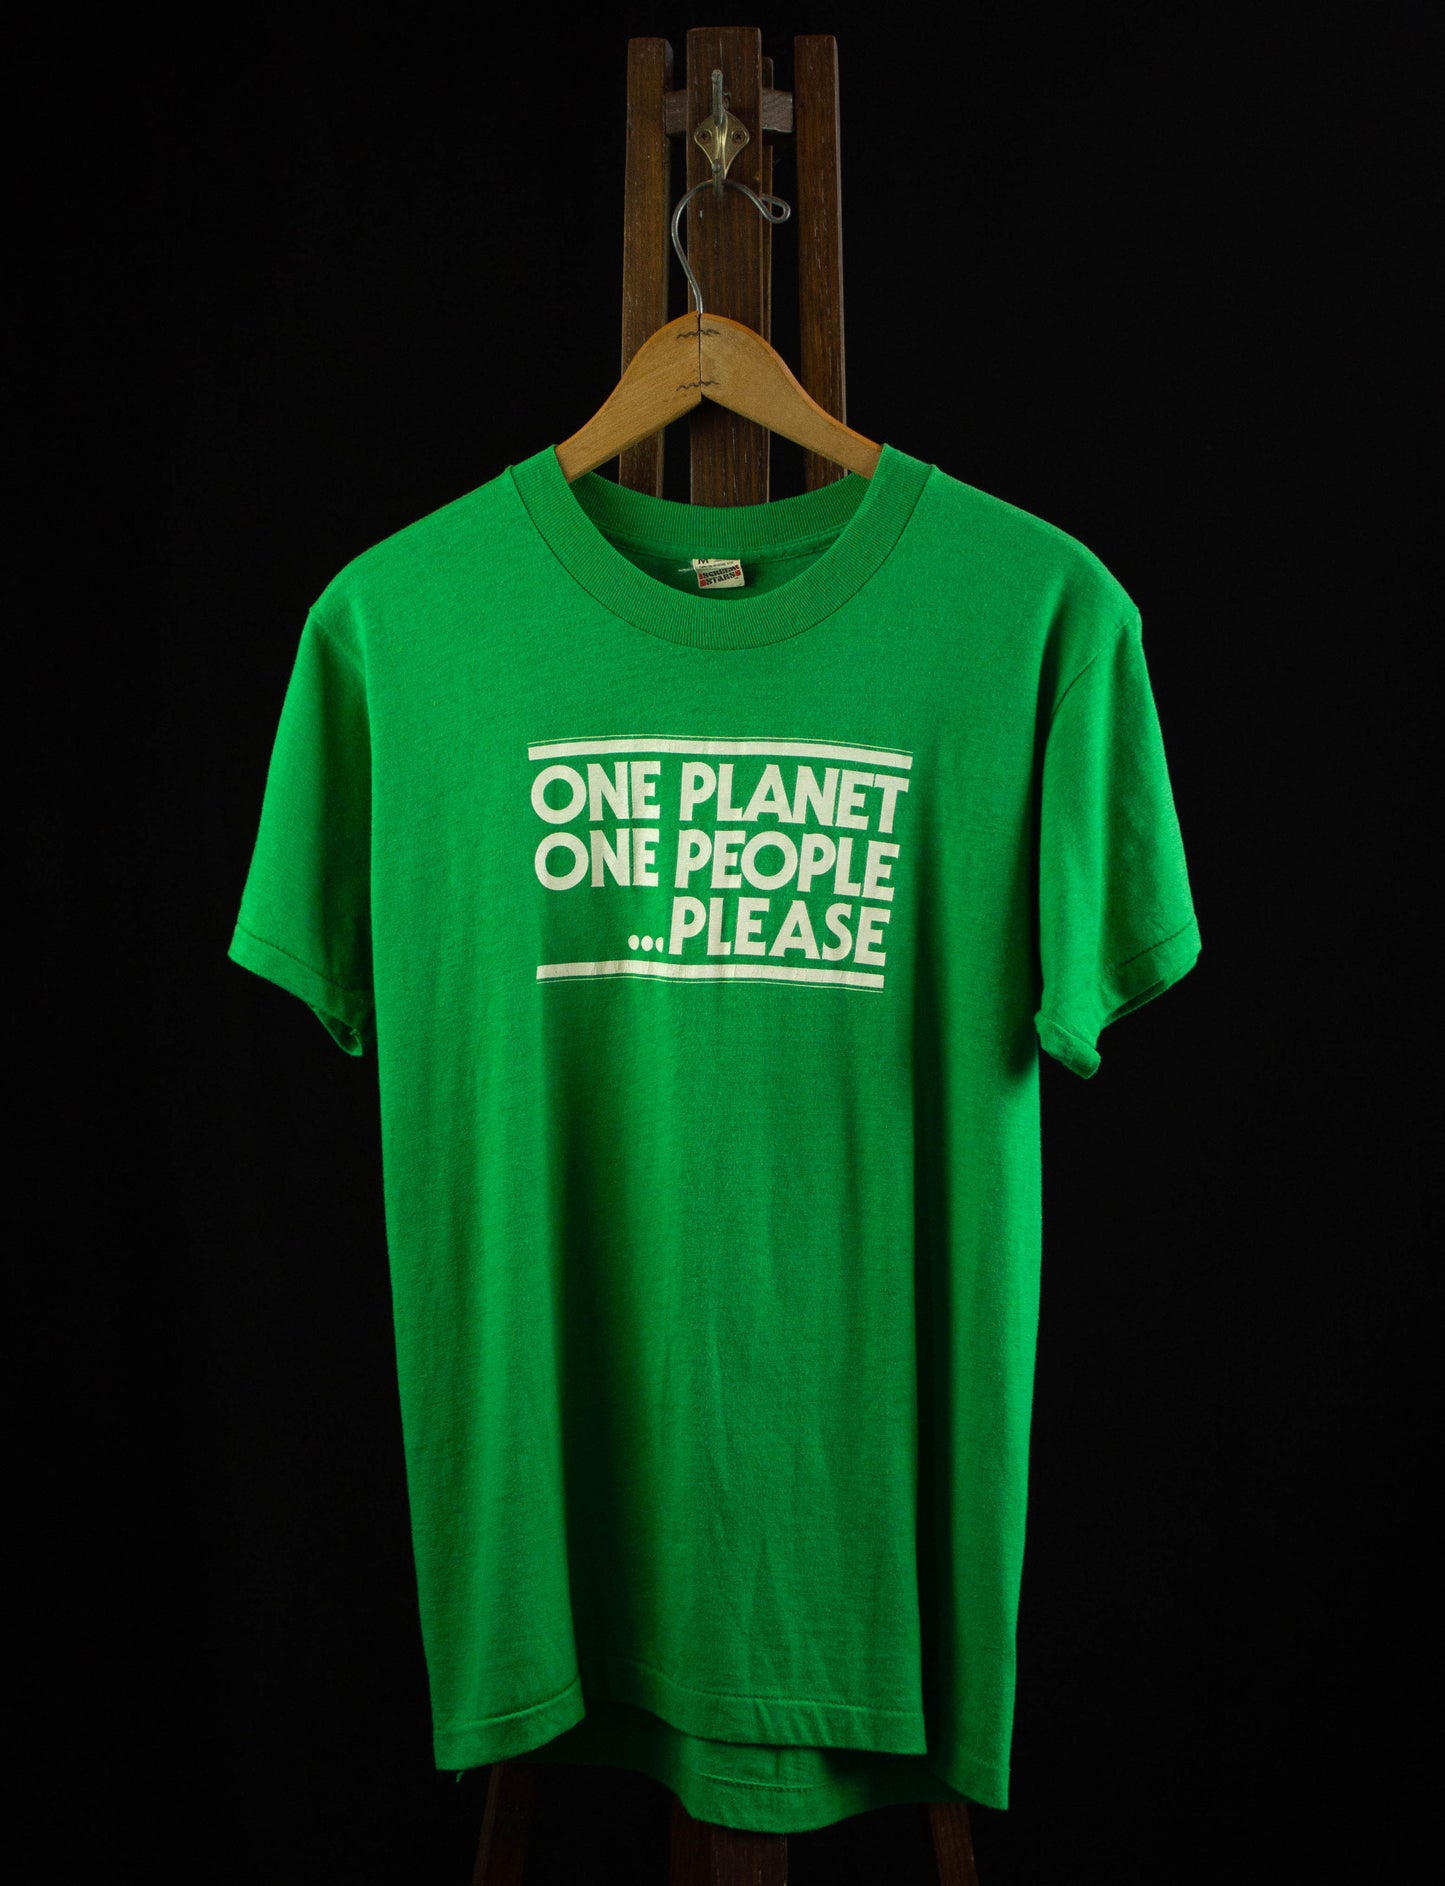 Vintage One Planet One People...Please Graphic T Shirt 80s Green and White Small-Medium